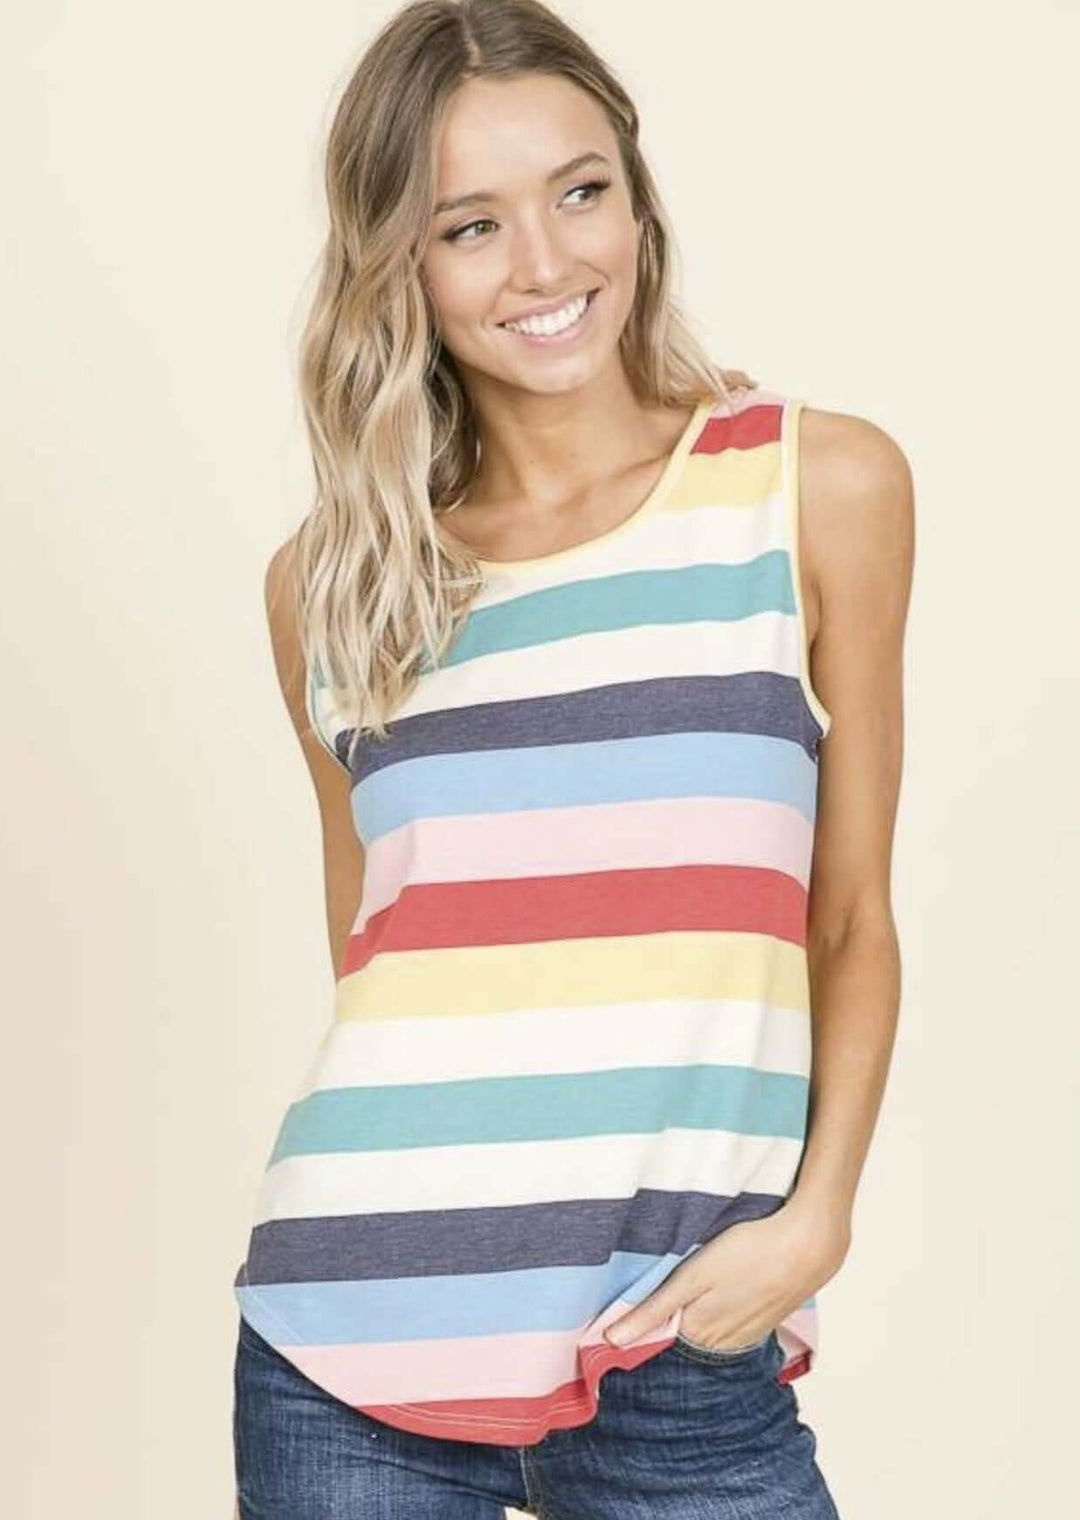 Made in USA Ladies Sleeveless Casual Tank Top, Striped Detail, Round Neckline, Longer Length, Rounded Hem in Colorful Pattern | Classy Cozy Cool Made in America Boutique